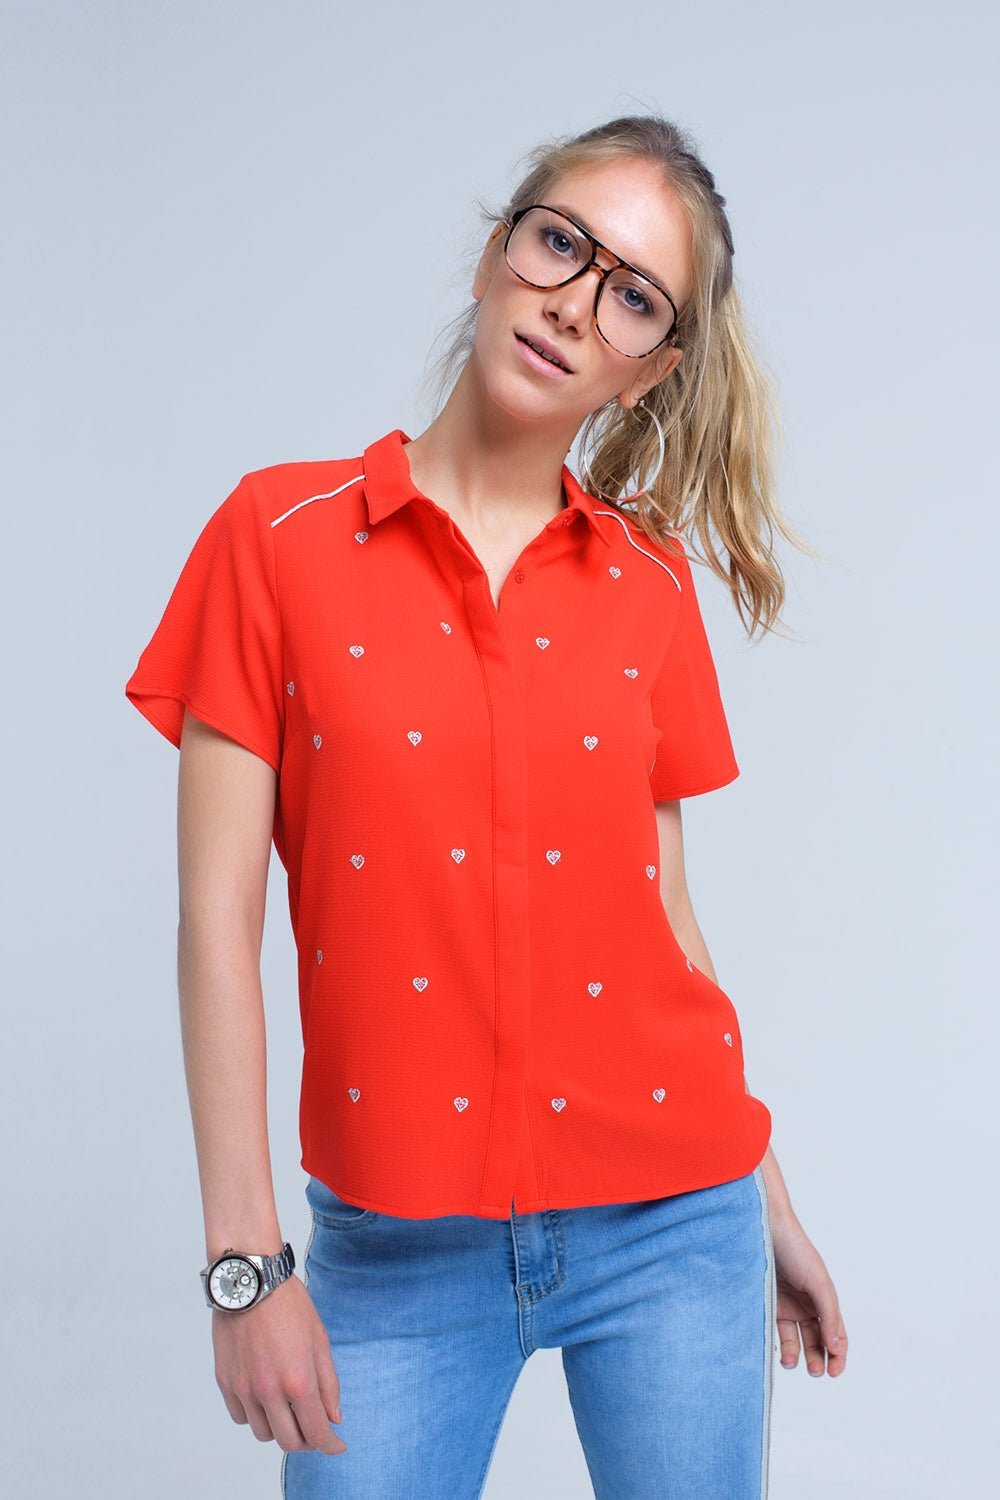 Red Shirt With Heart Embroidery - Mack & Harvie